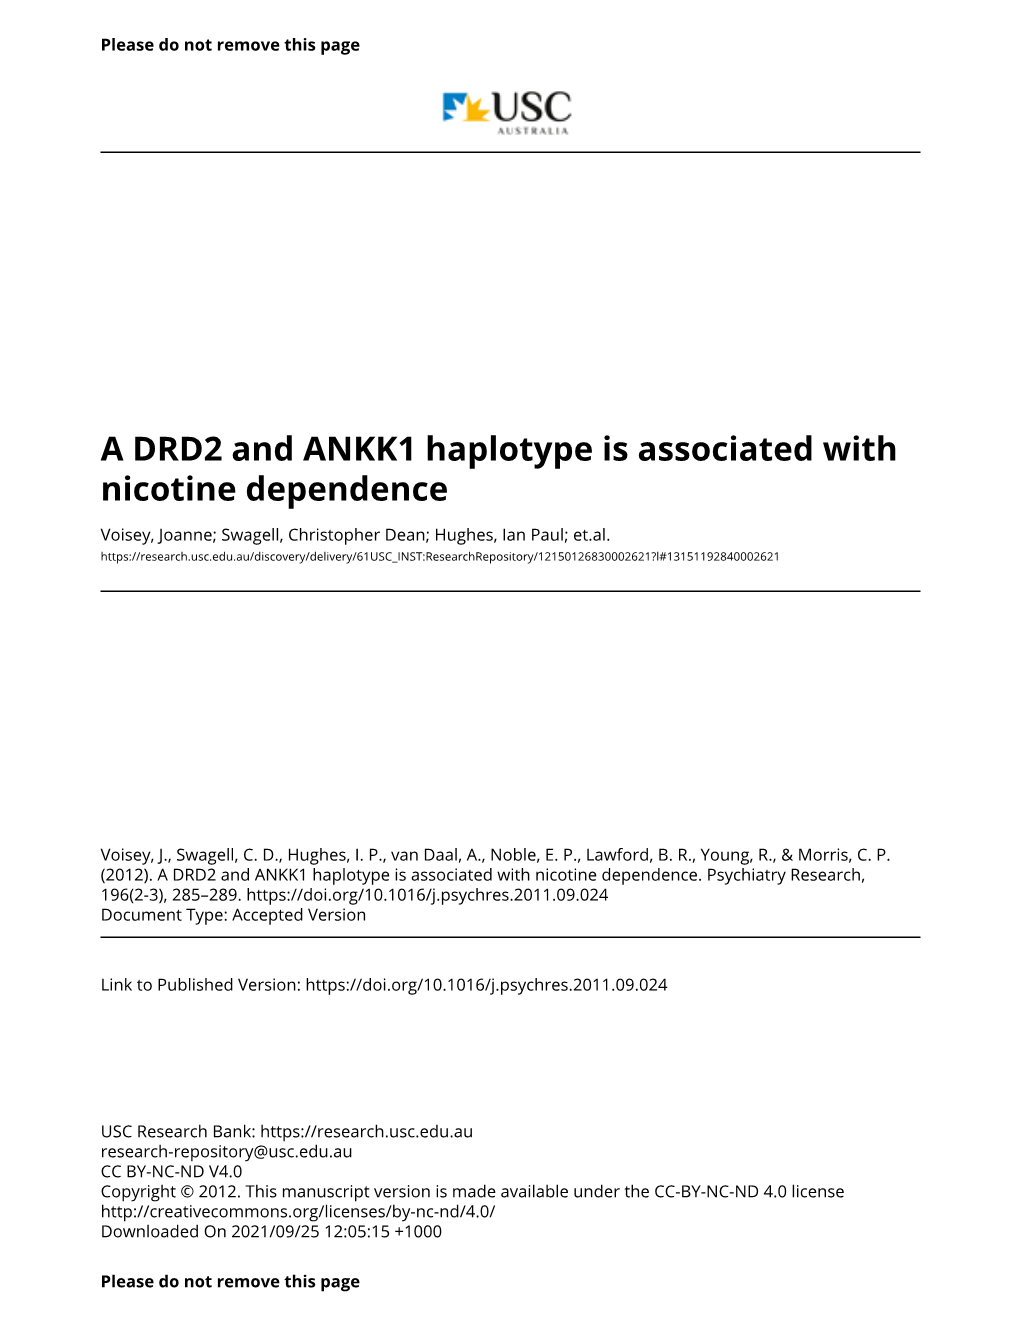 A DRD2 and ANKK1 Haplotype Is Associated with Nicotine Dependence